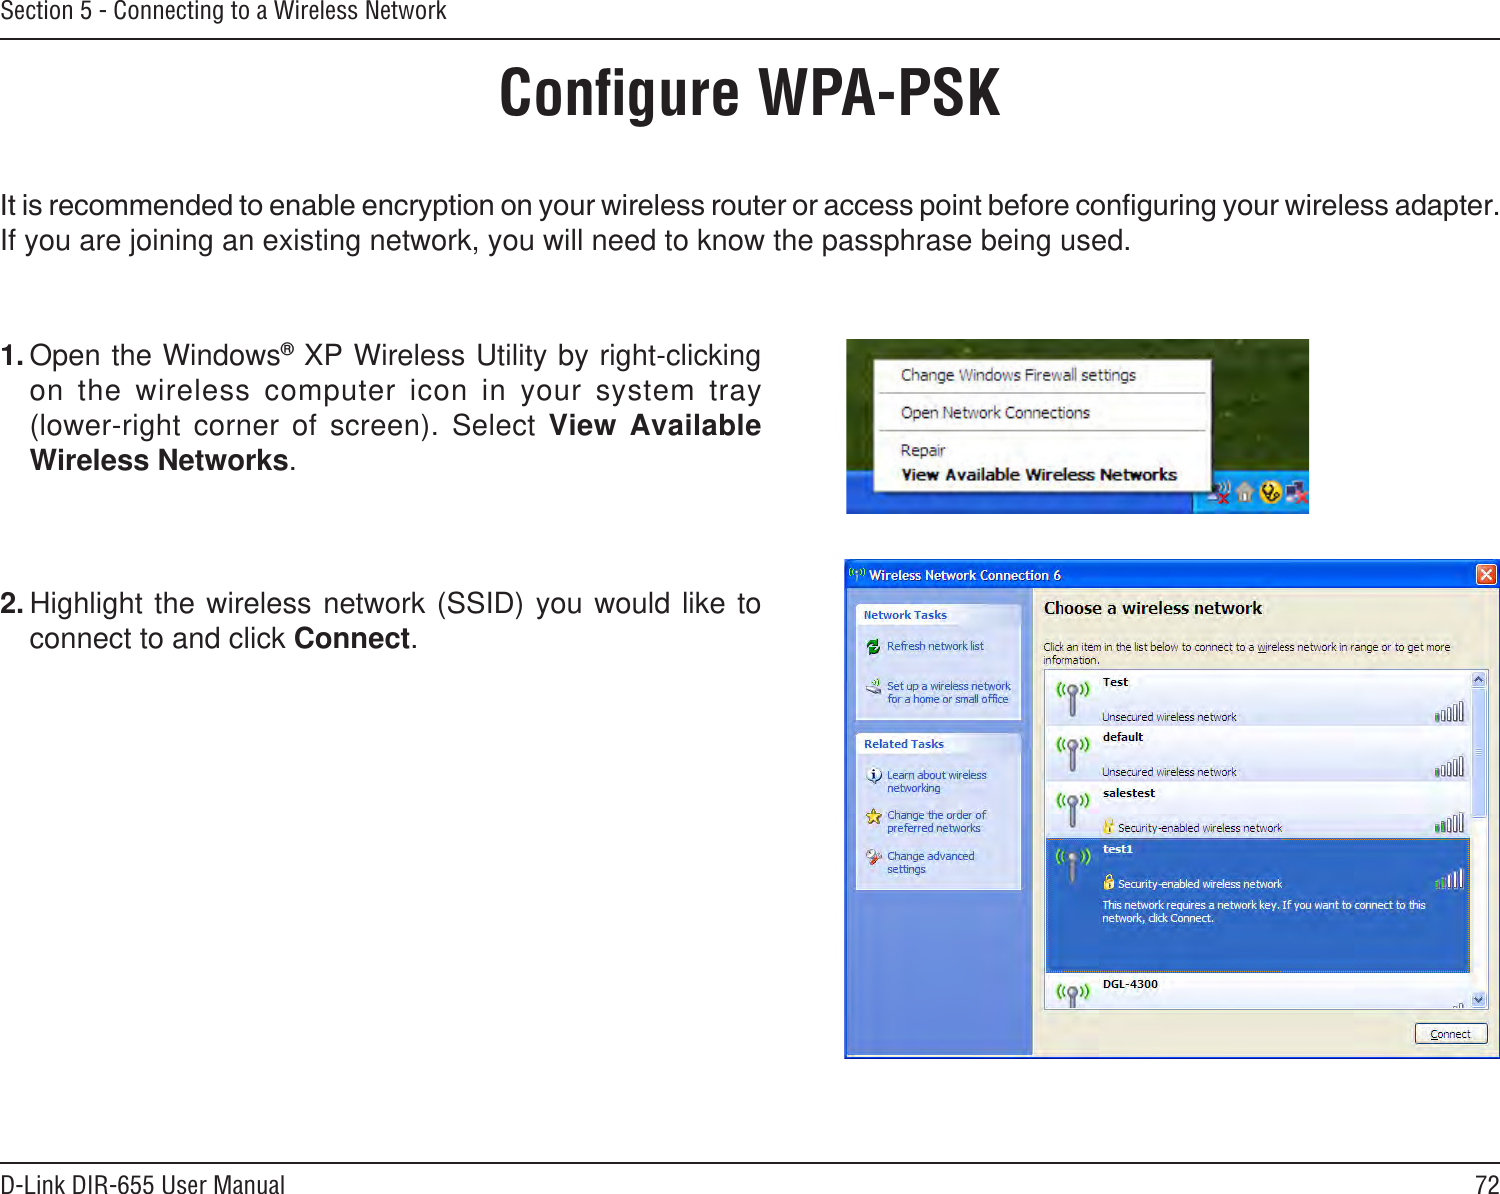 72D-Link DIR-655 User ManualSection 5 - Connecting to a Wireless NetworkConﬁgure WPA-PSKIf you are joining an existing network, you will need to know the passphrase being used.2. Highlight  the  wireless  network  (SSID)  you  would  like  to connect to and click Connect.1. Open the Windows® XP Wireless Utility by right-clicking on  the  wireless  computer  icon  in  your  system  tray  (lower-right  corner  of  screen).  Select  View  Available Wireless Networks. 